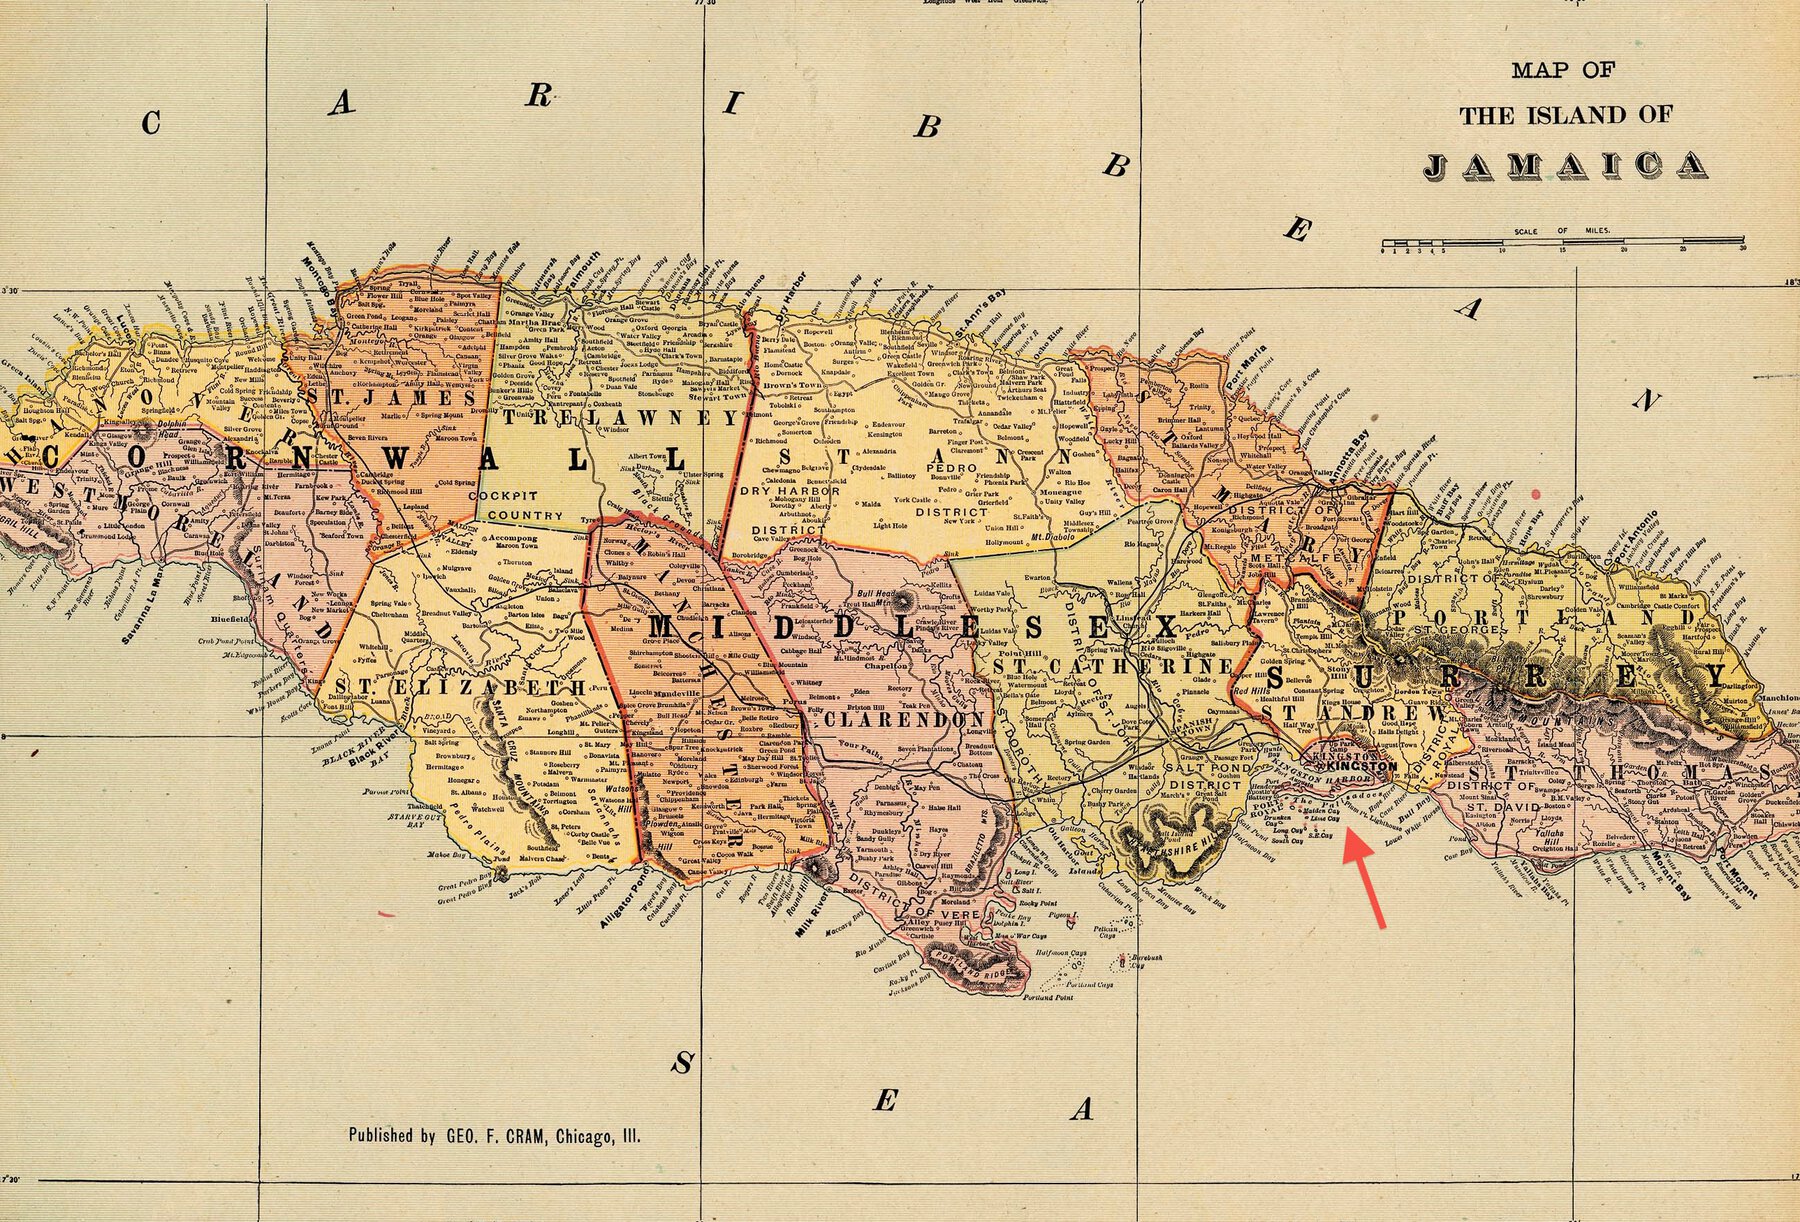 Printed color map of Jamaica with red arrow pointing to Kingston.